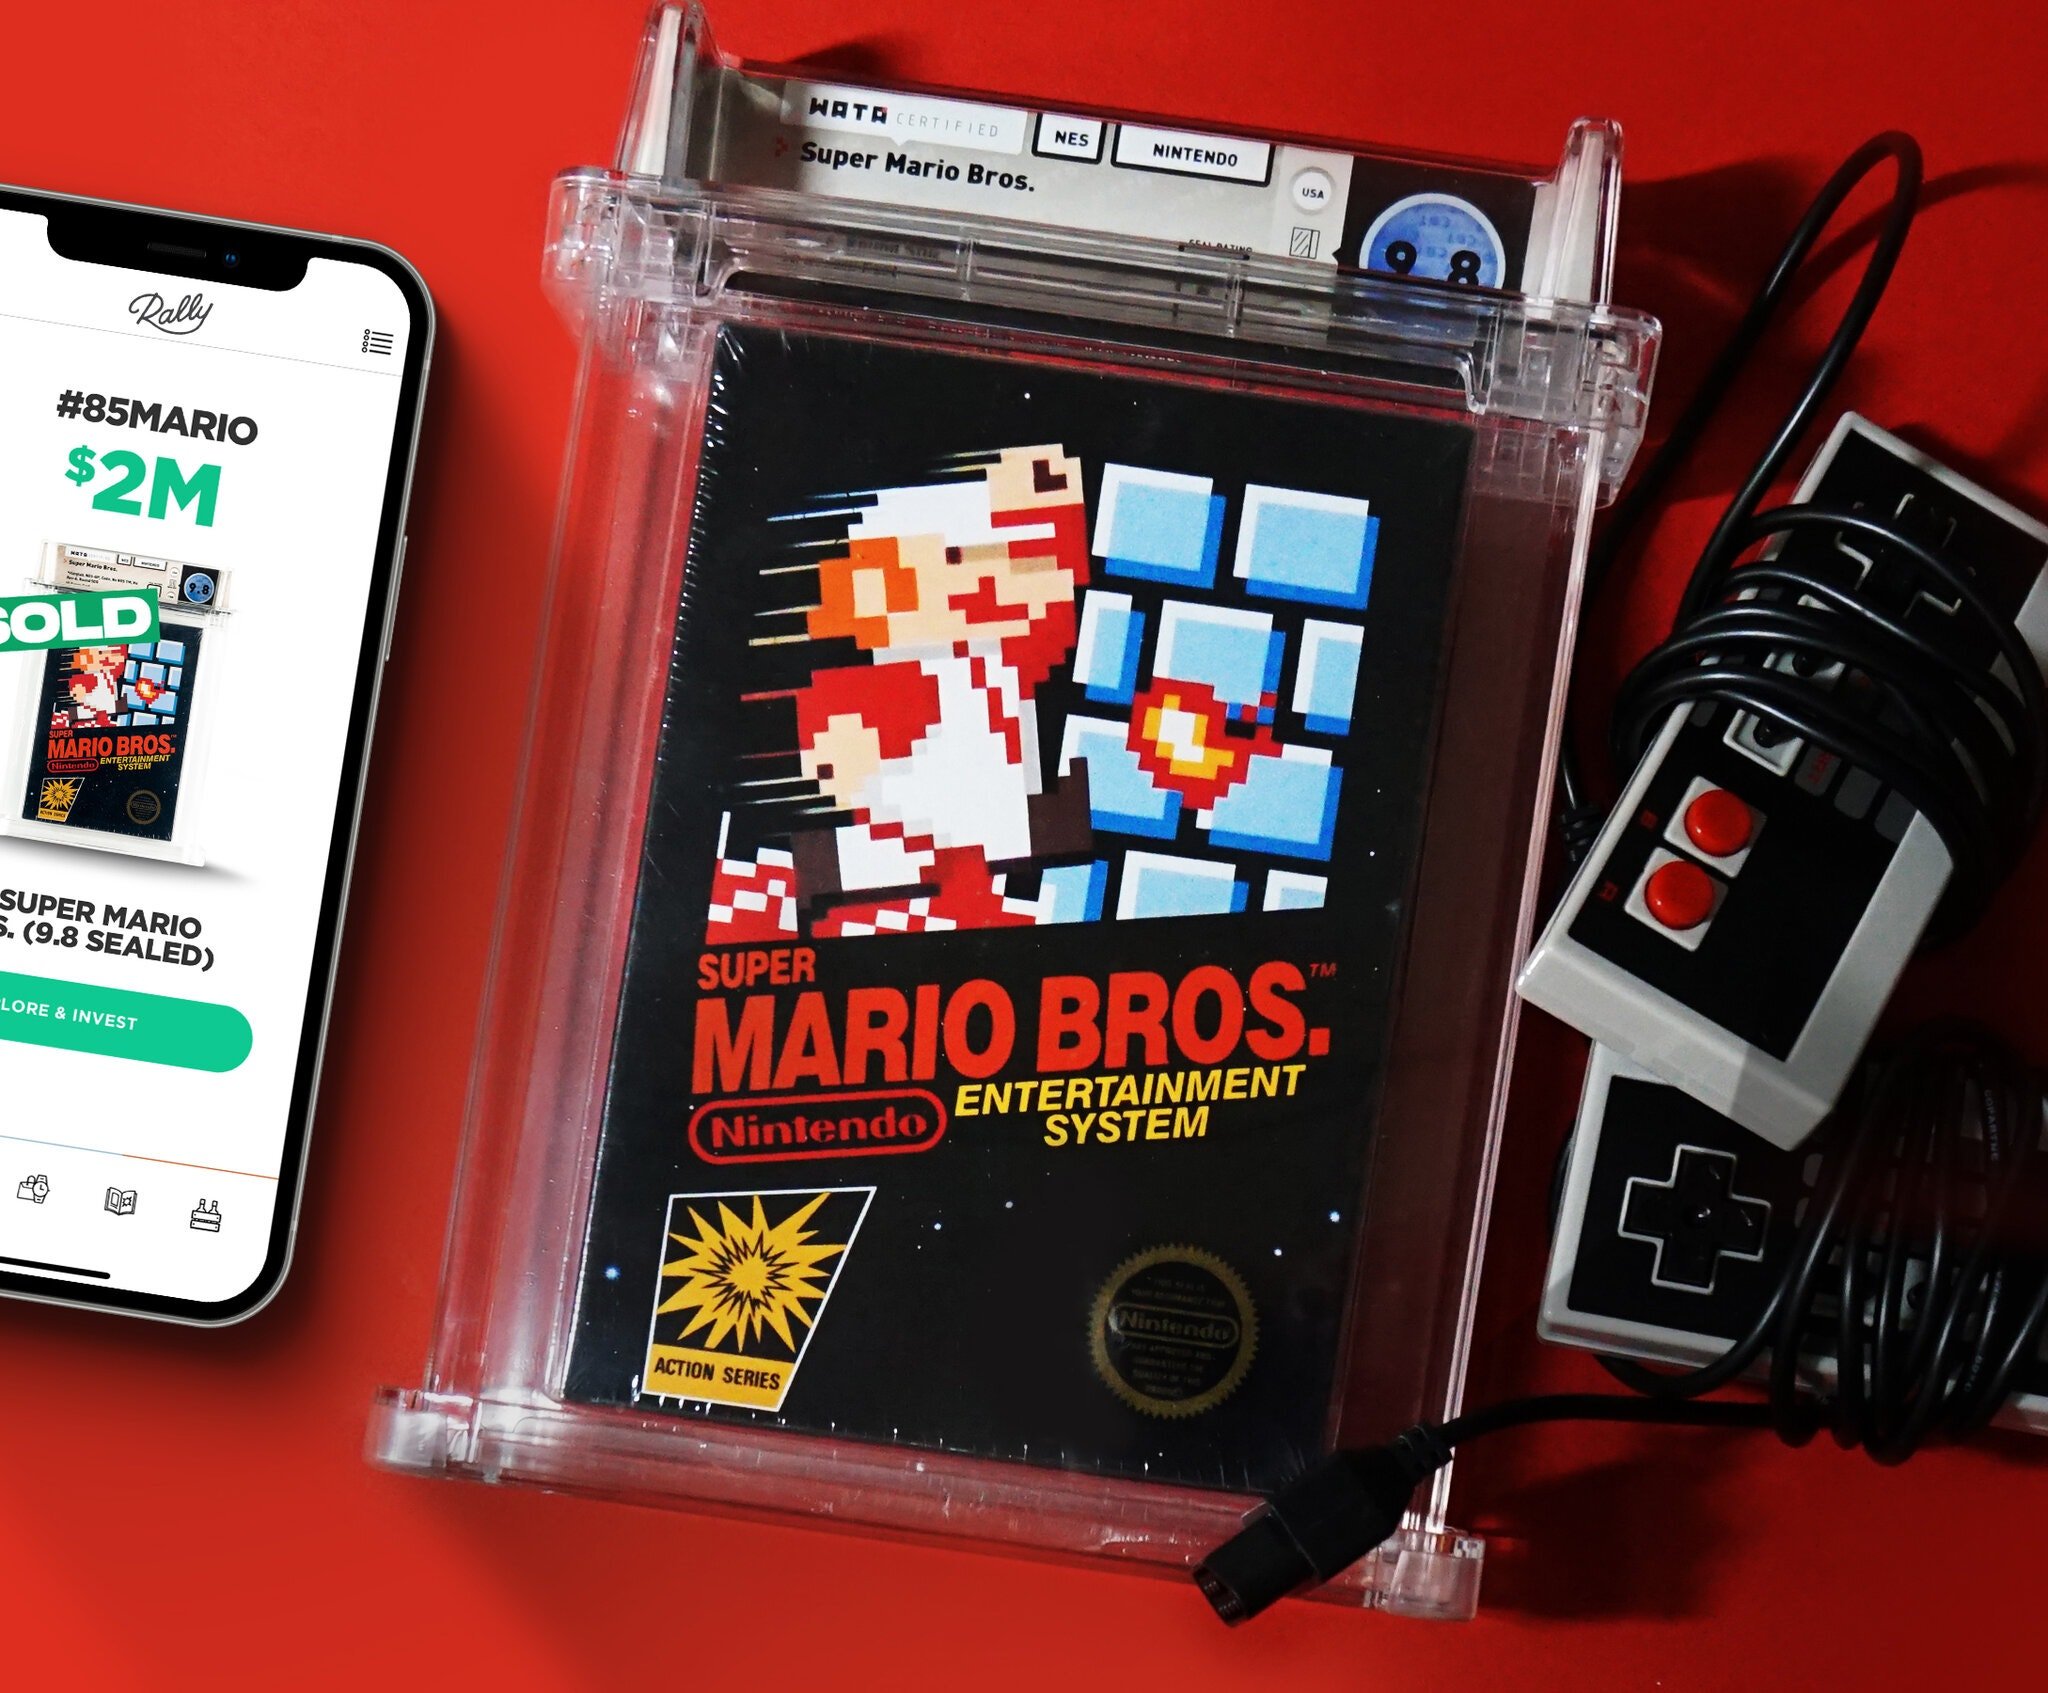 Unopened Super Mario Bros. game from 1986 sells for $660,000